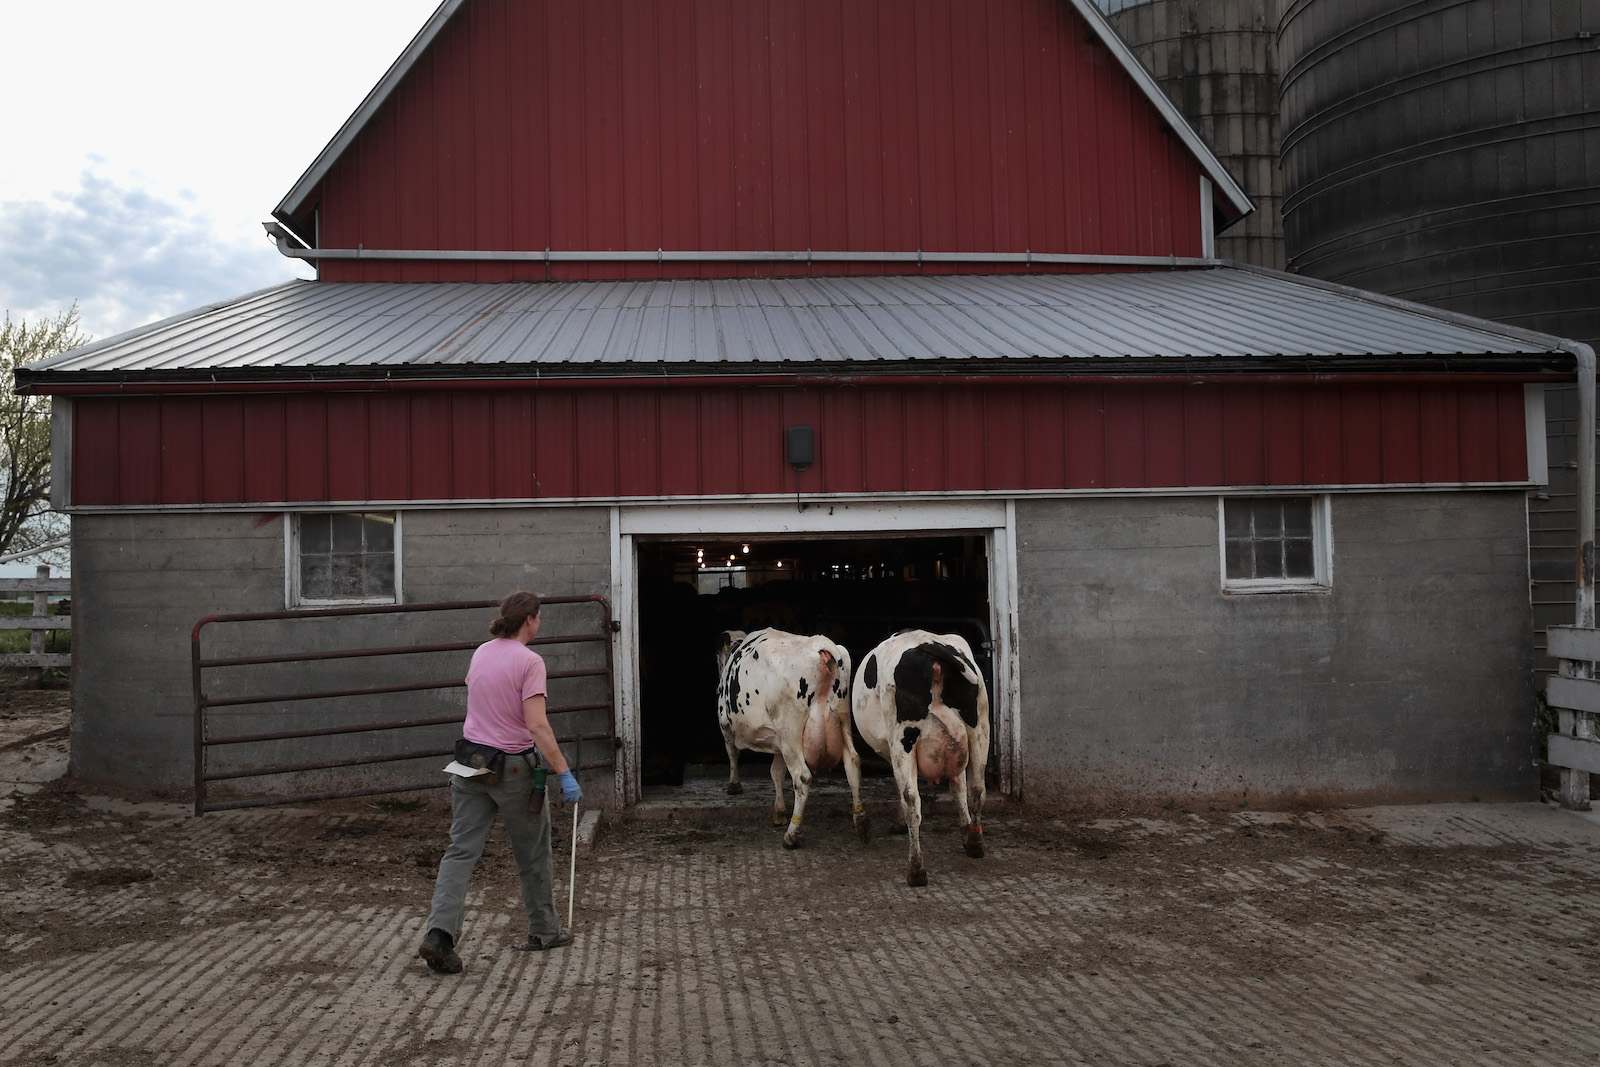 A woman herds cows inside a red barn